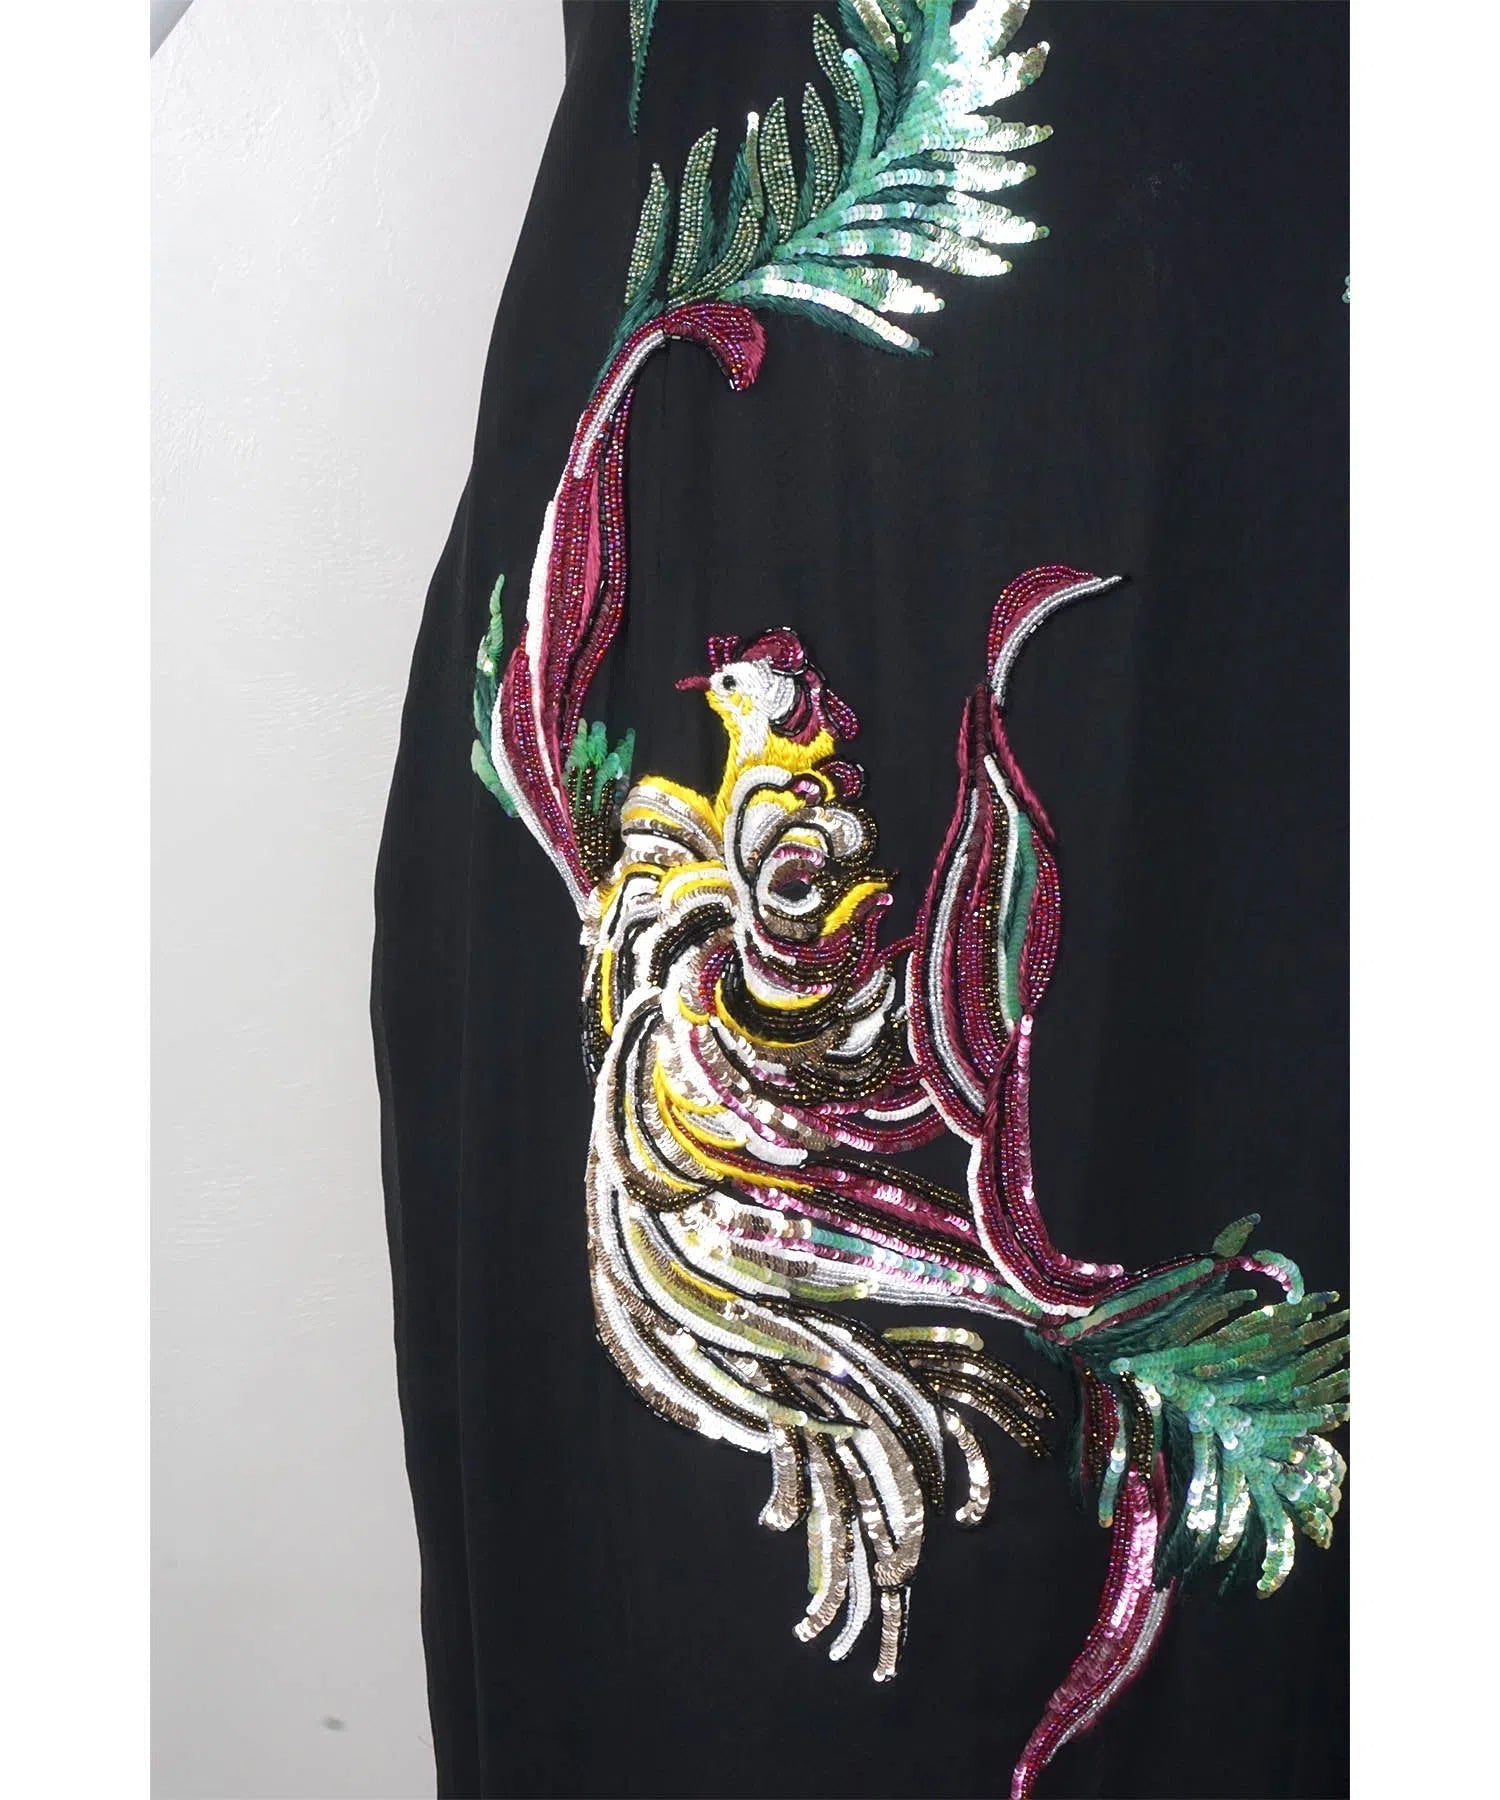 Givenchy Couture by Alexander McQueen Vintage 1997 Sequin Embroidered Bird Dress - Foxy Couture Carmel